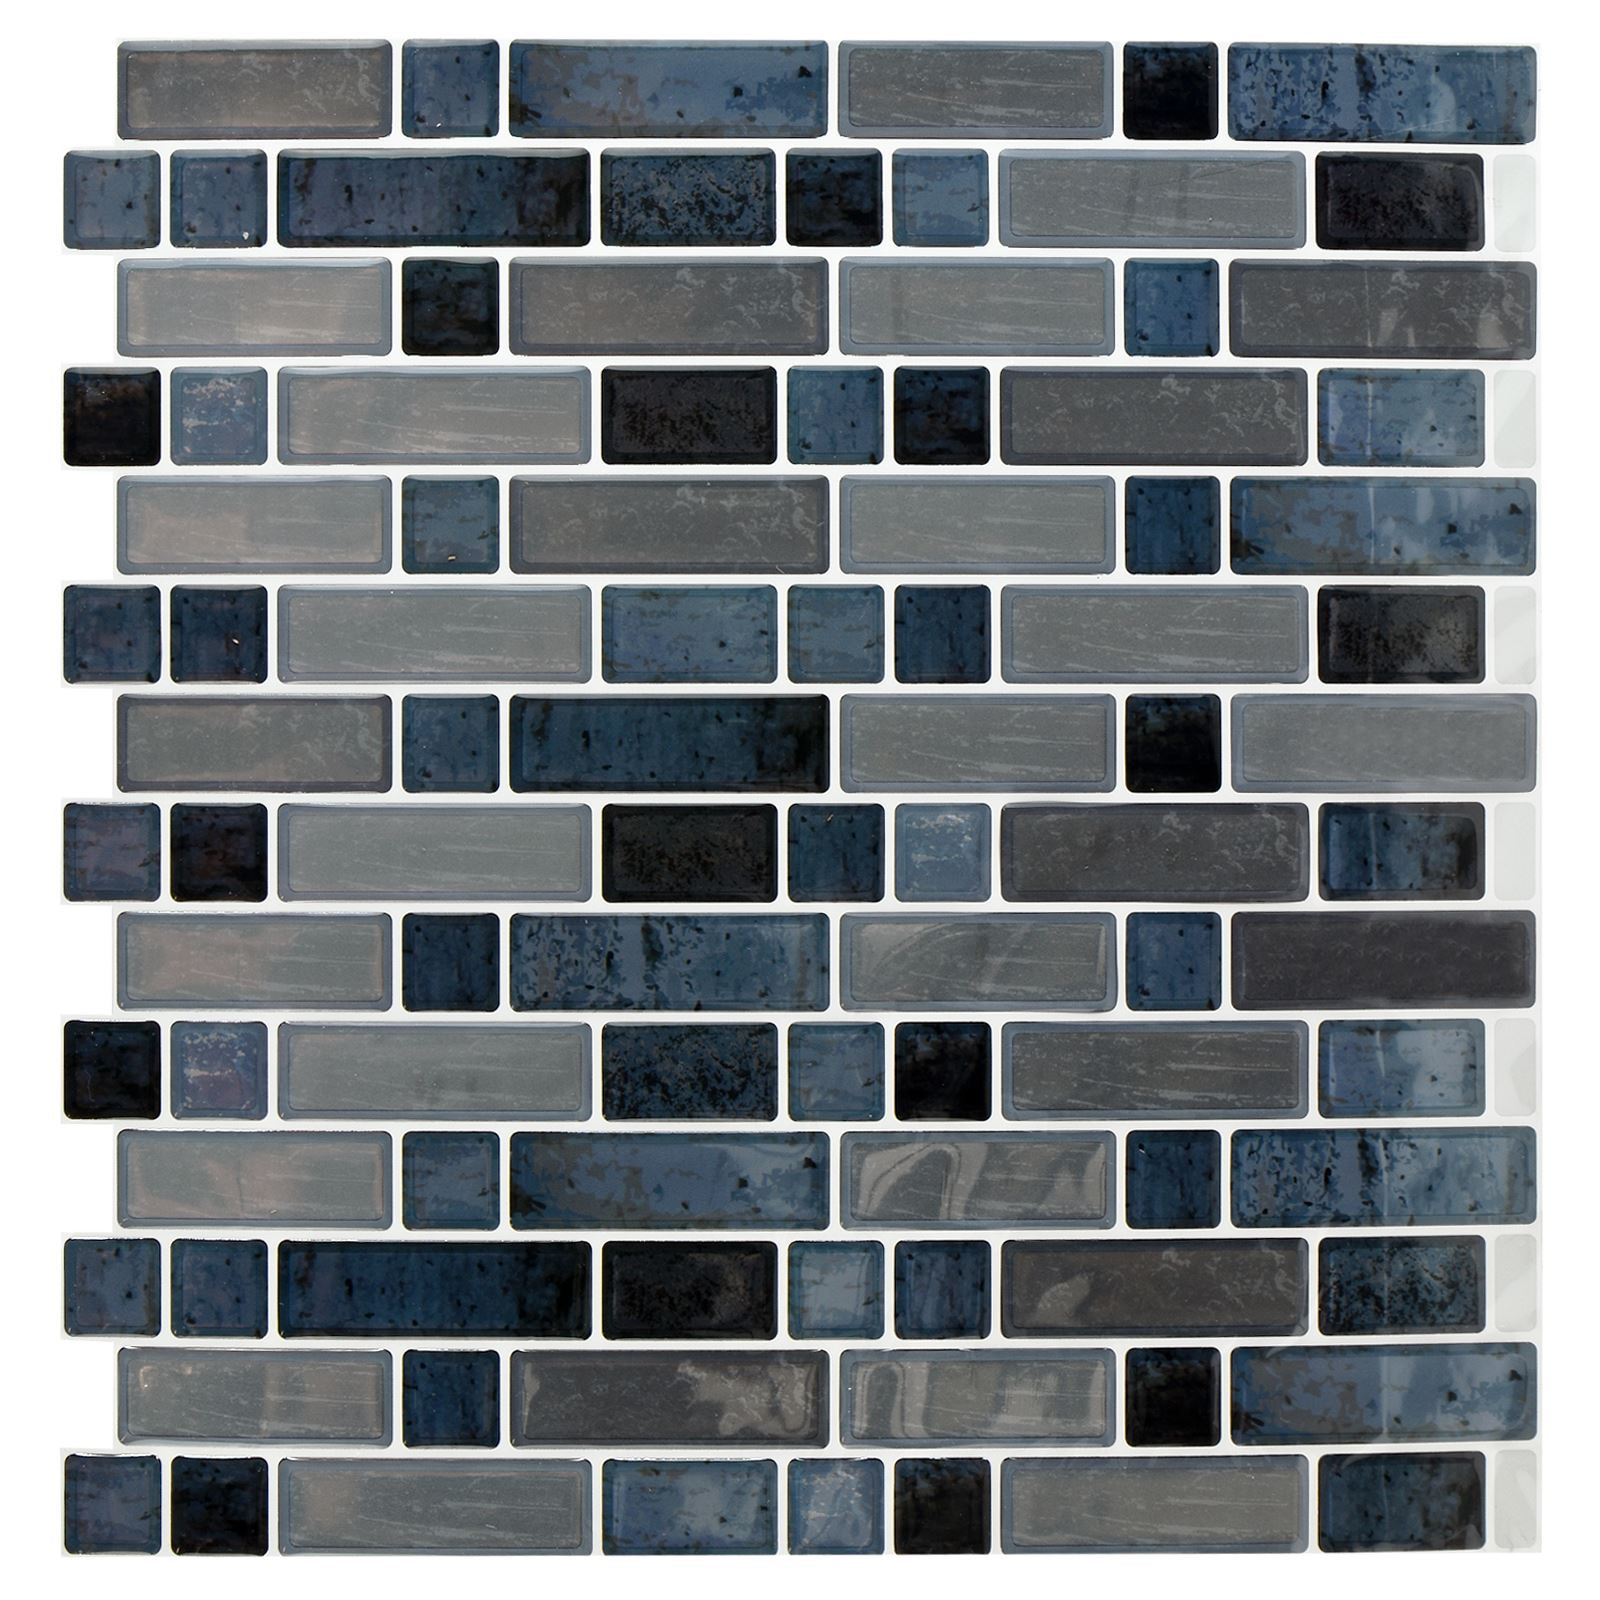 Tile Stickers For Bathroom
 Self Adhesive Mosaic Tile Stickers Bathroom Kitchen